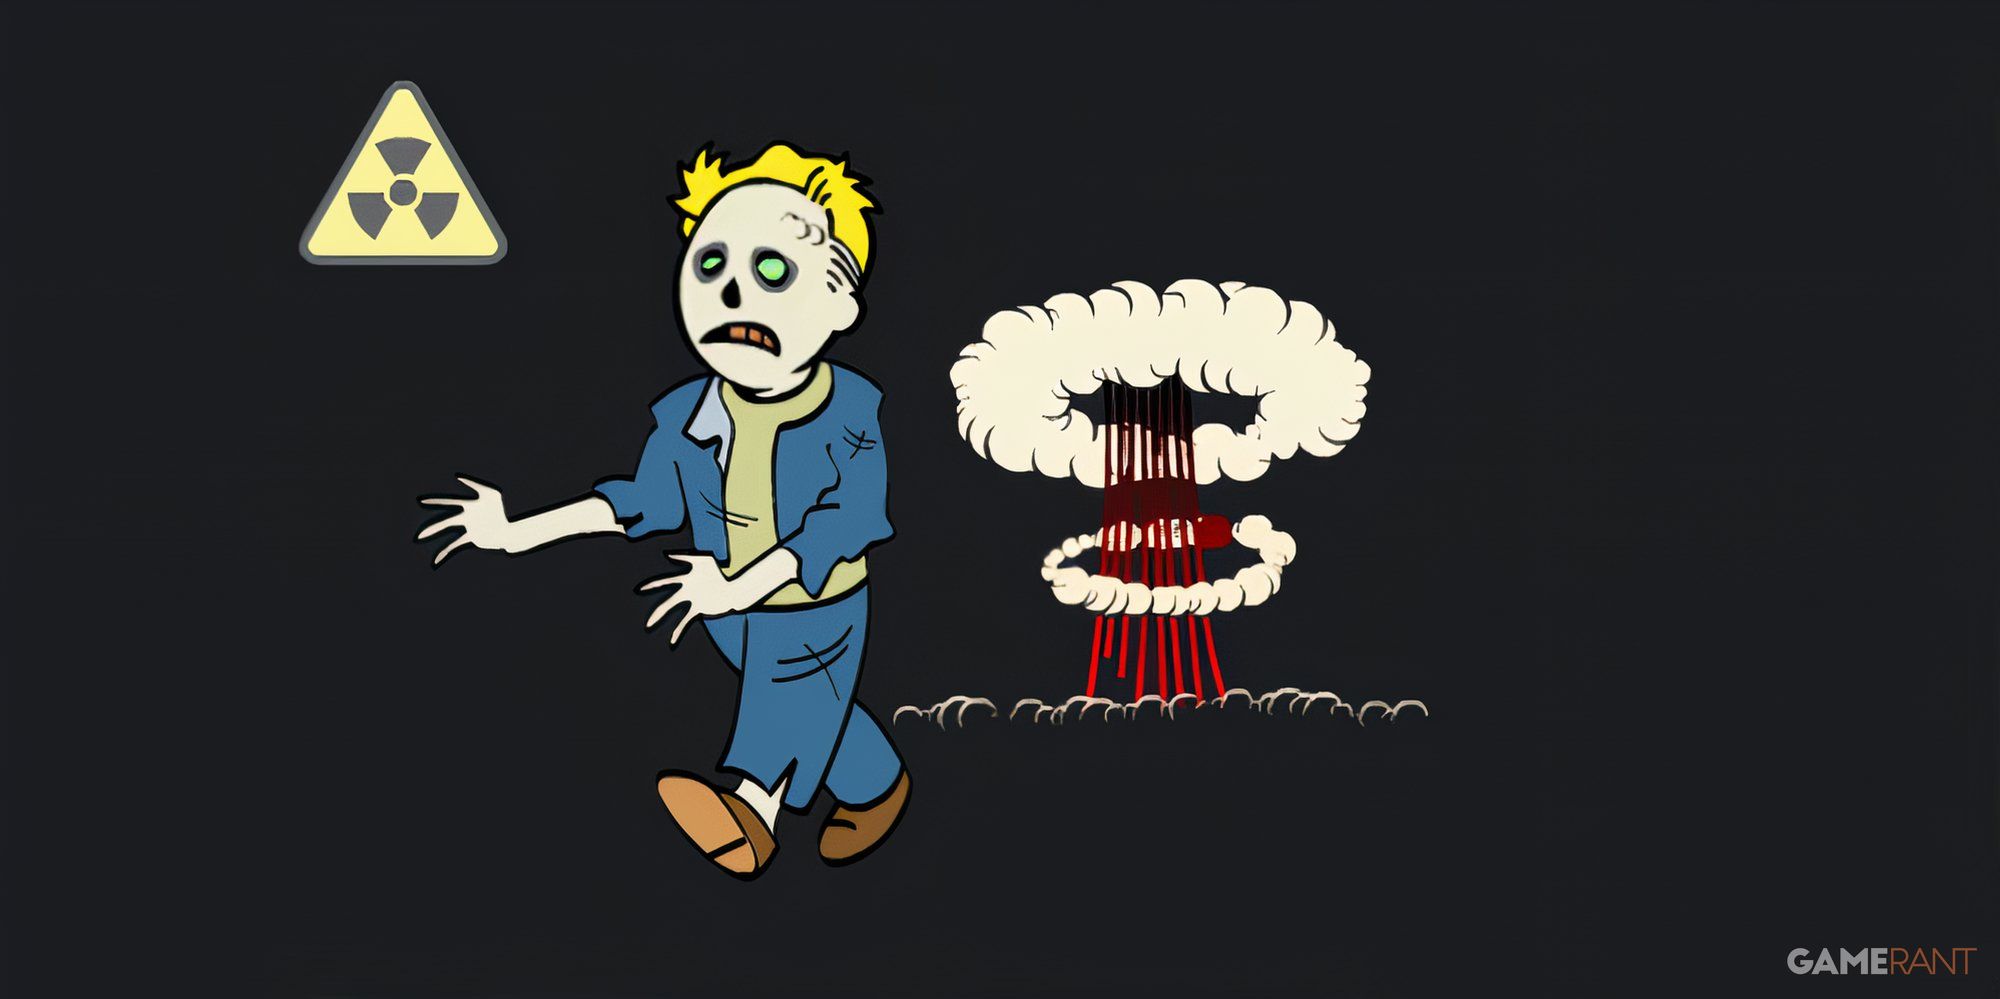 Vault Boy, turned into a ghoul, walks away from a mushroom cloud